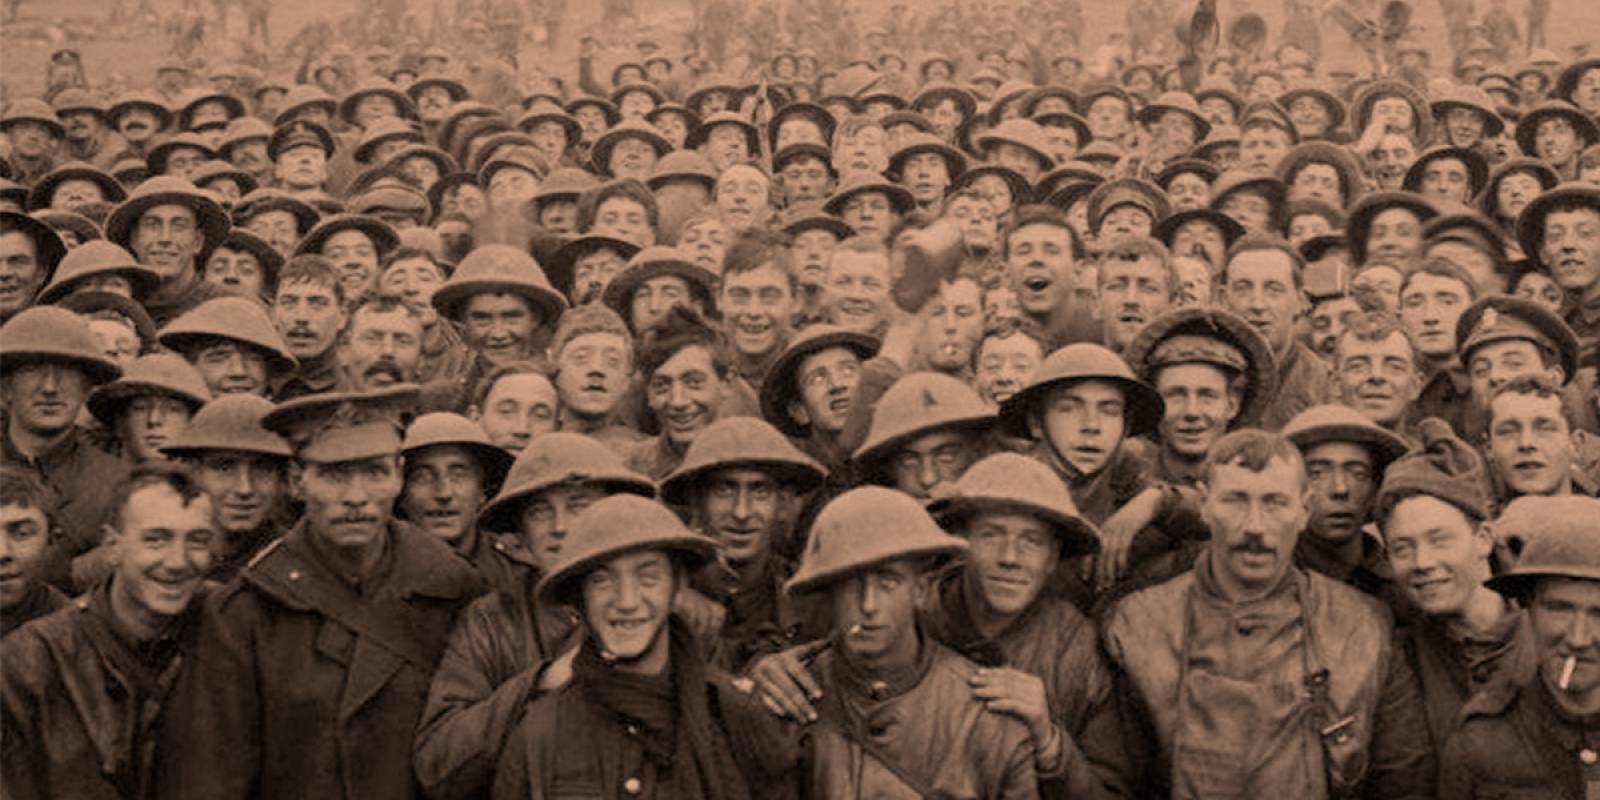 Soldiers at The Somme